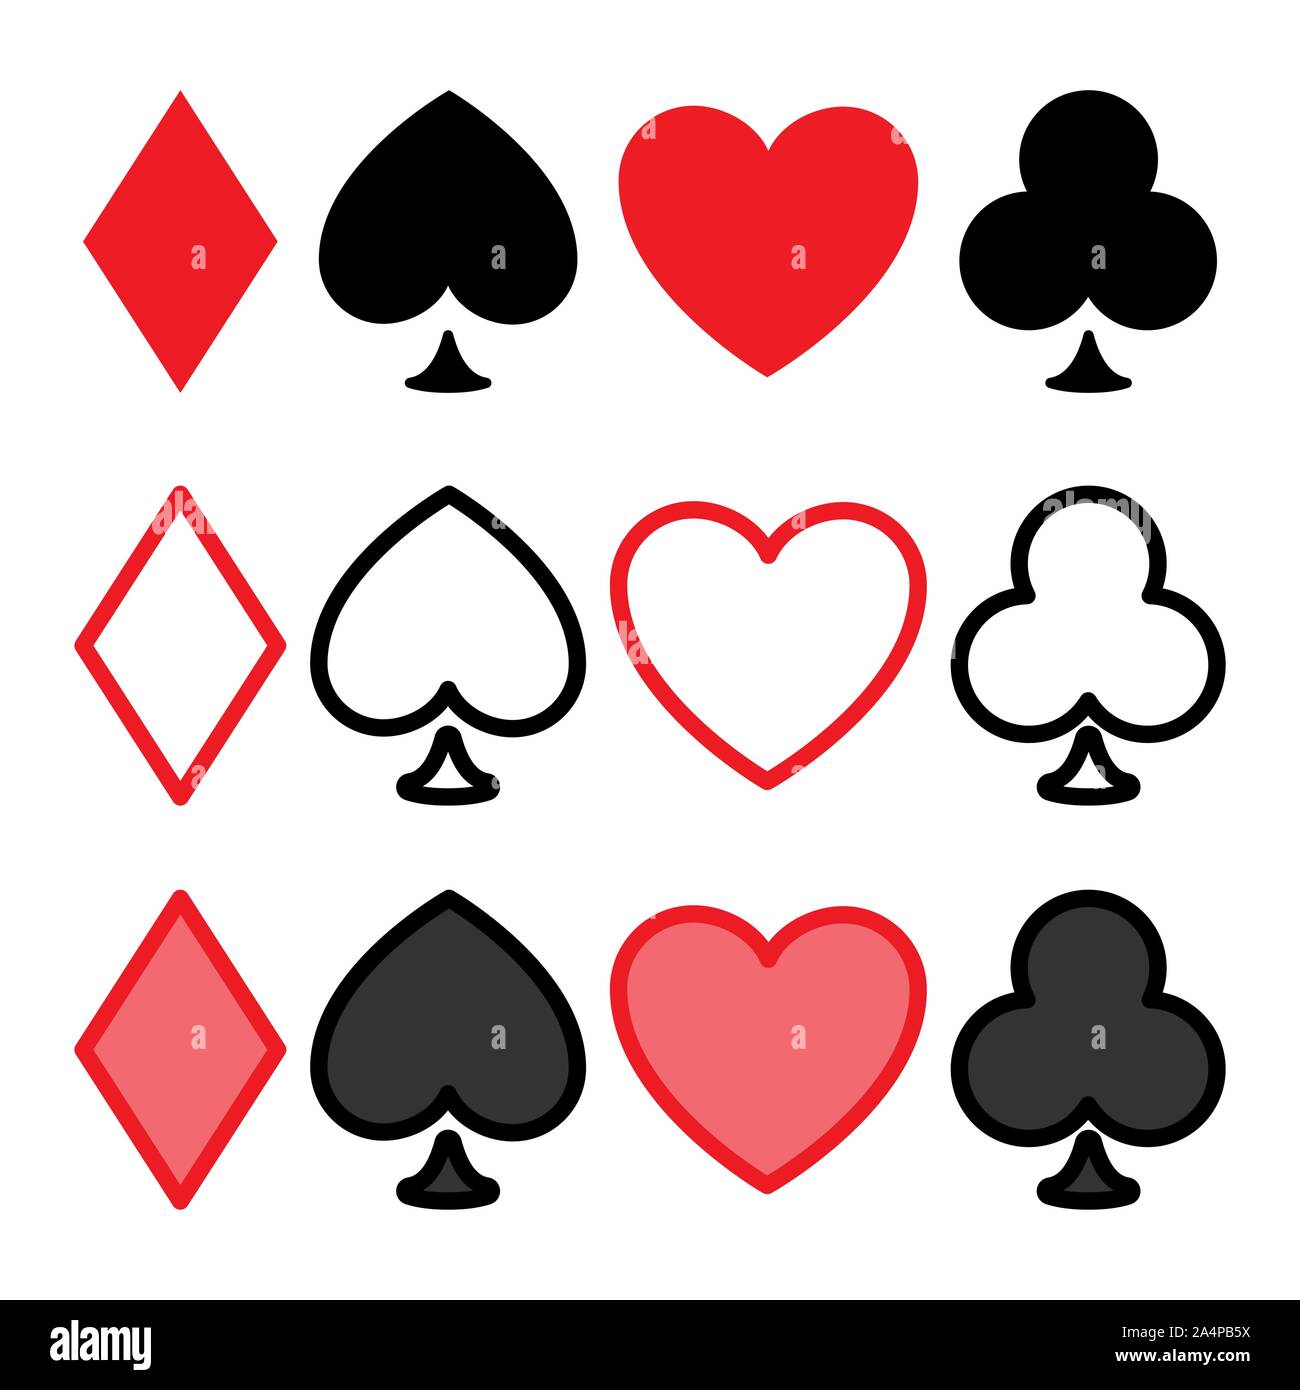 Cards diamond - Download free icons